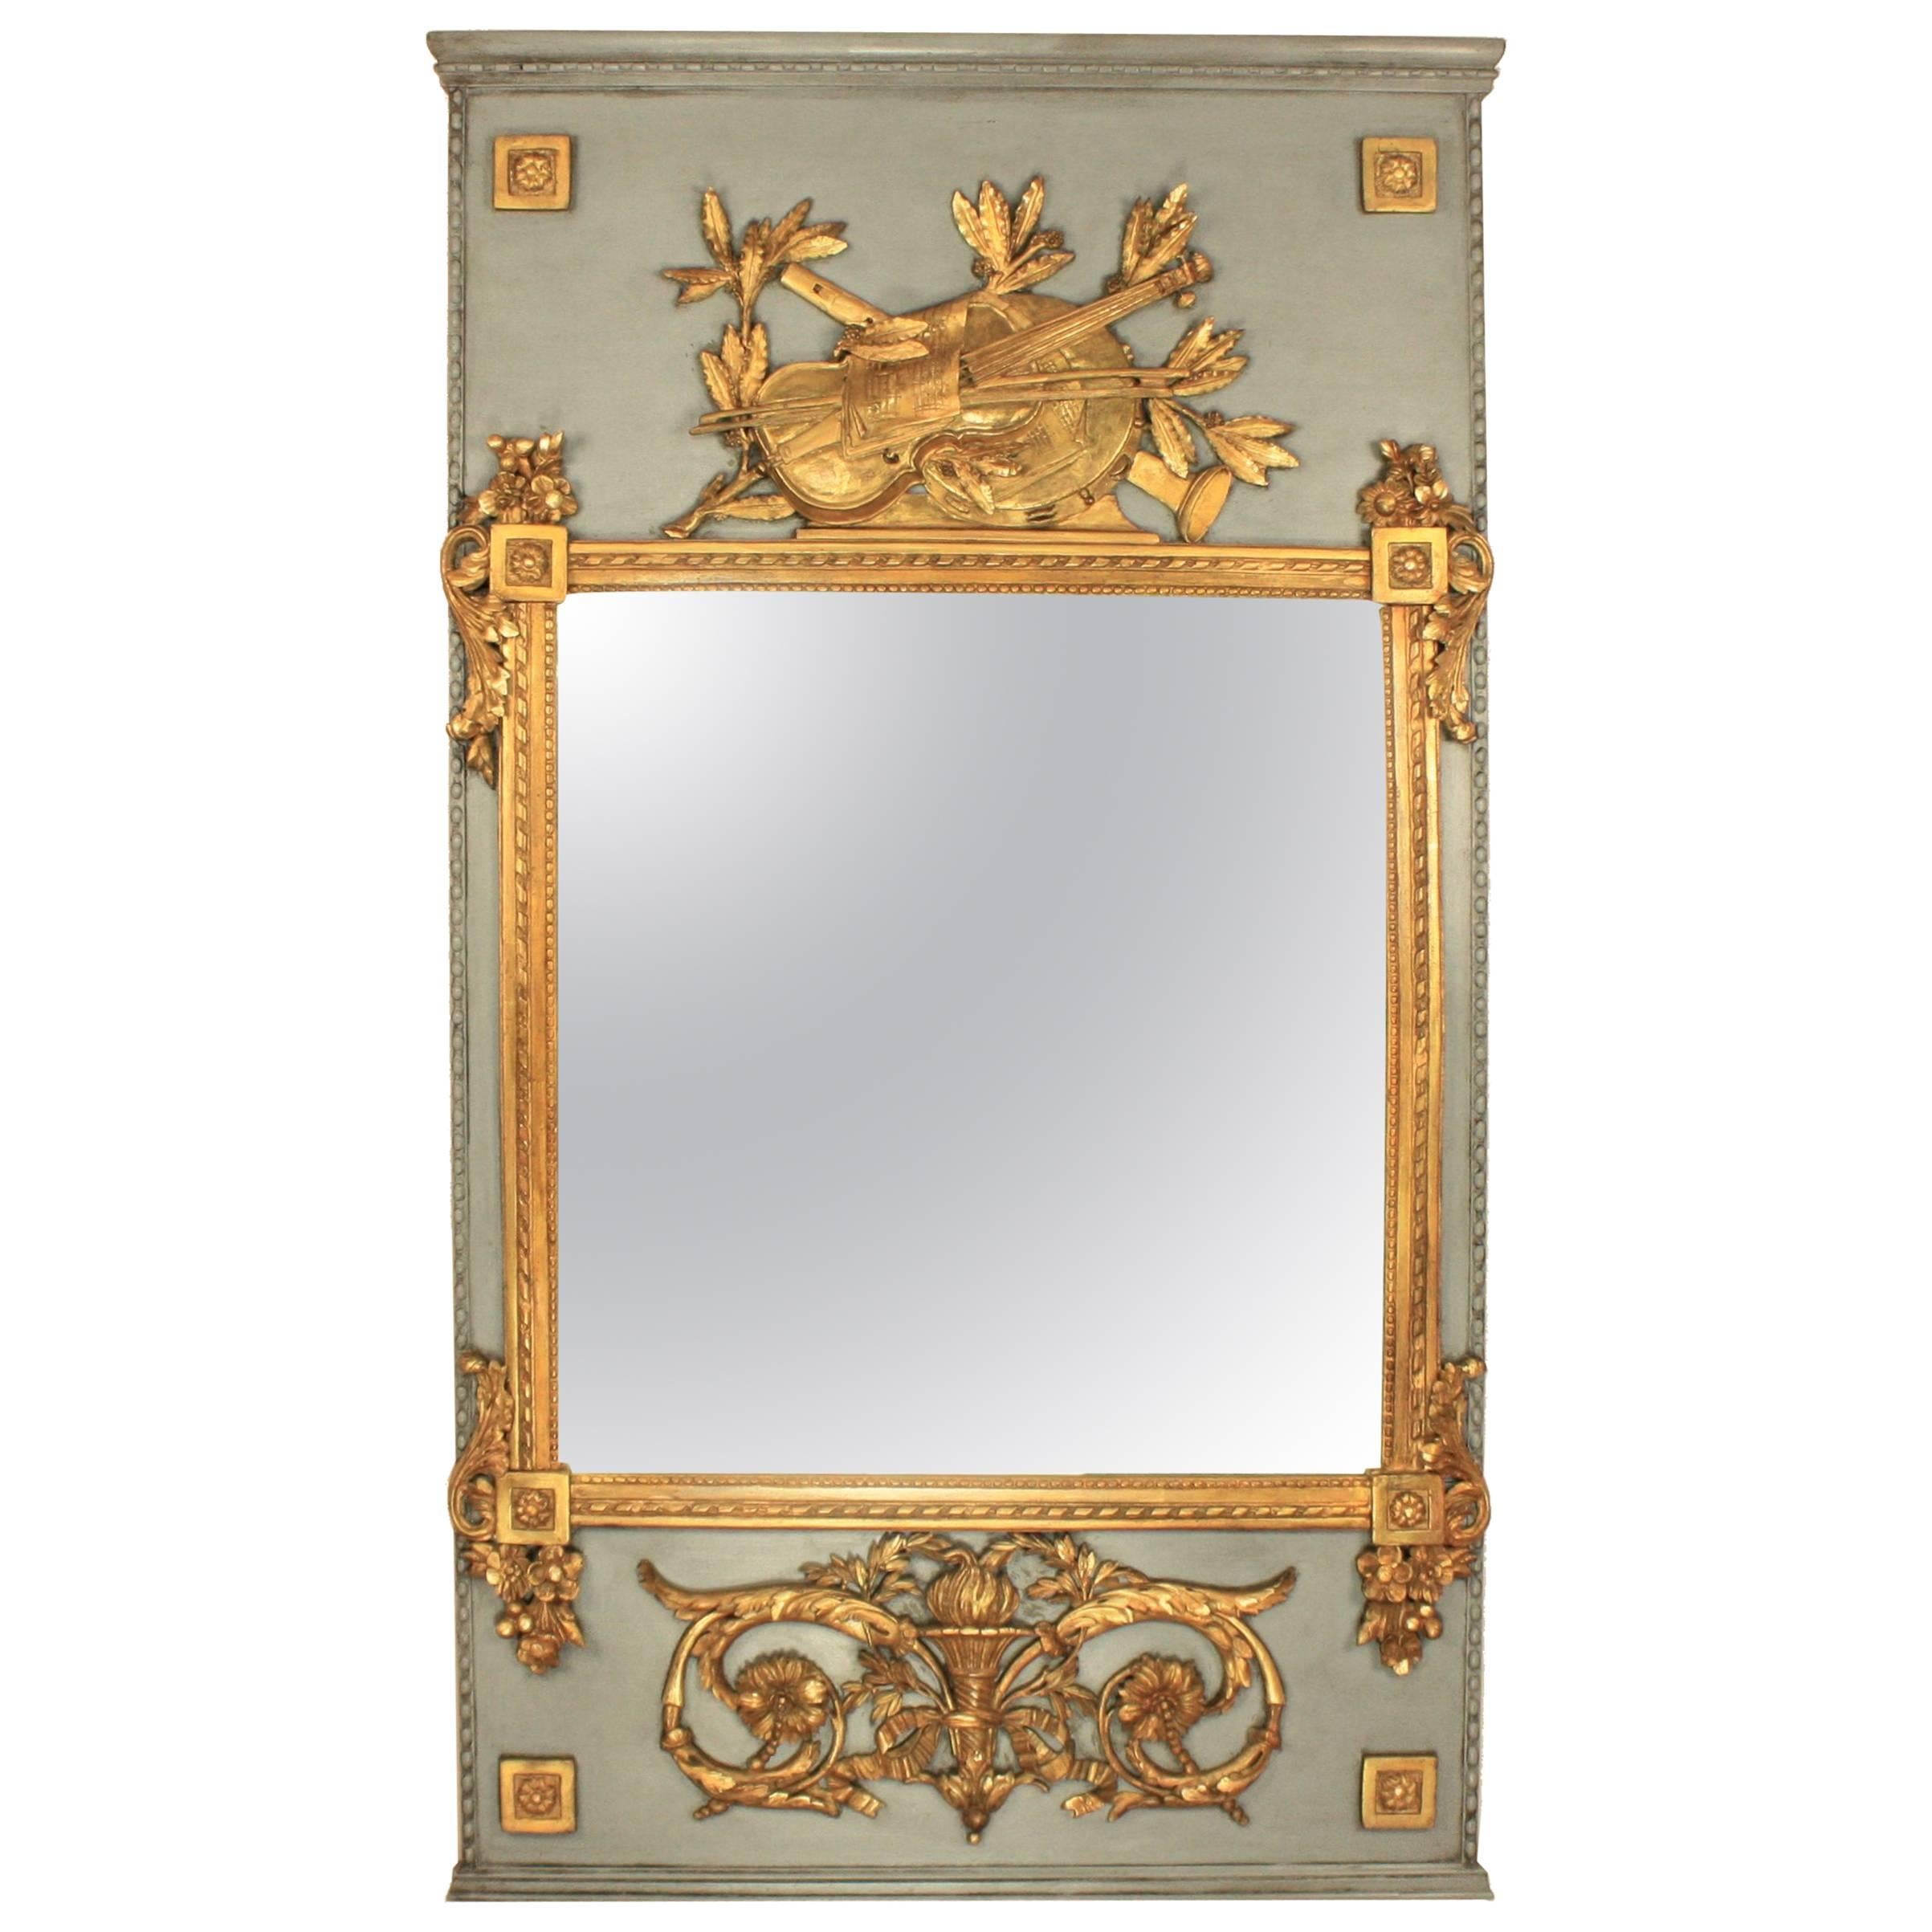 French Painted and Giltwood Louis XVI Trumeau Mirror, late 18th Century